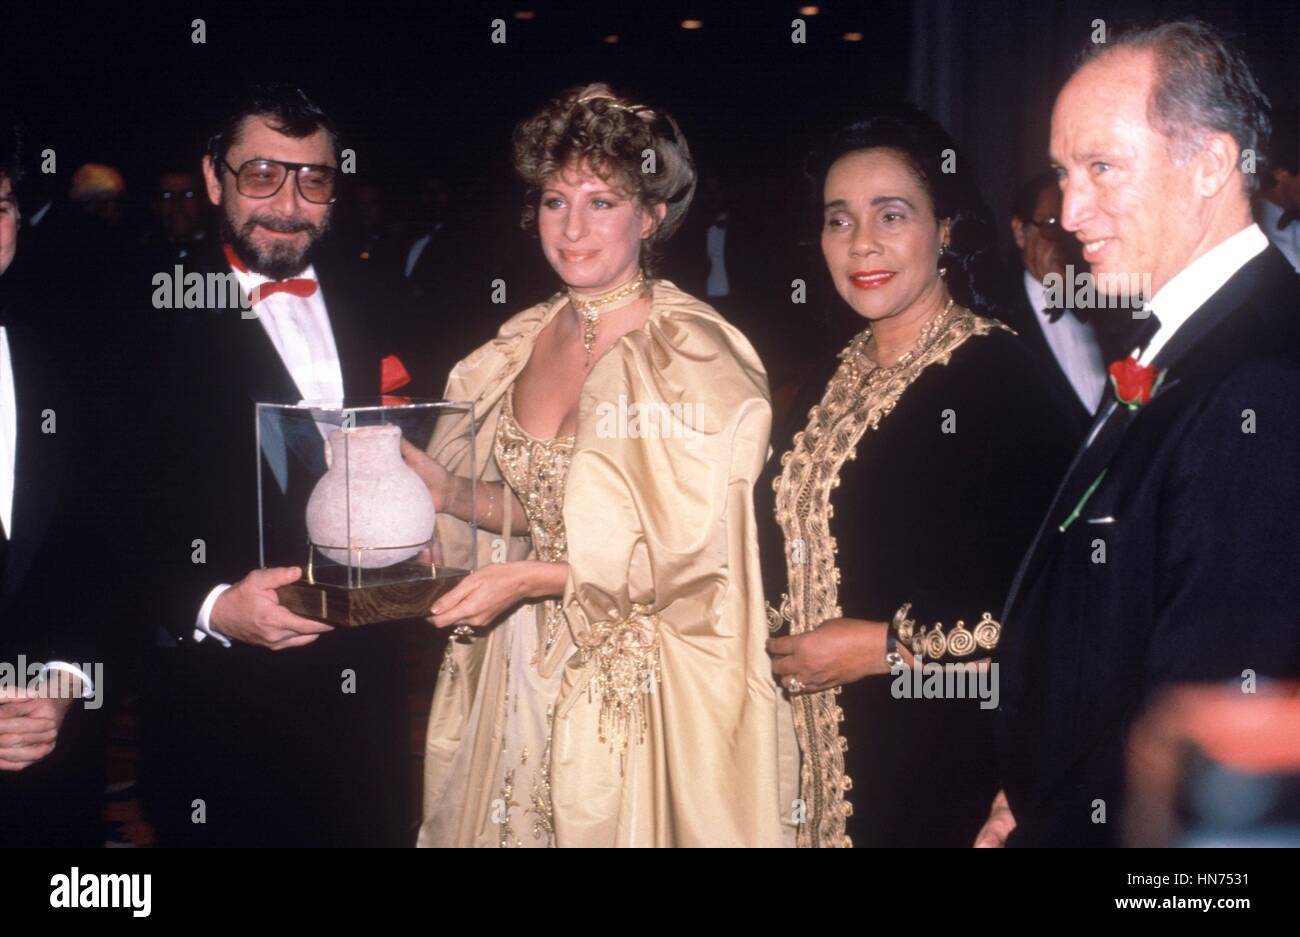 Barbra Streisand recieves the UJA Woman of the Year Award in 1983. The award was presented by Walter Yentikoff, Coretta Scott King and Pierre Trudea at the Sheraton Hotel in New York City. Novemer 1983. Stock Photo